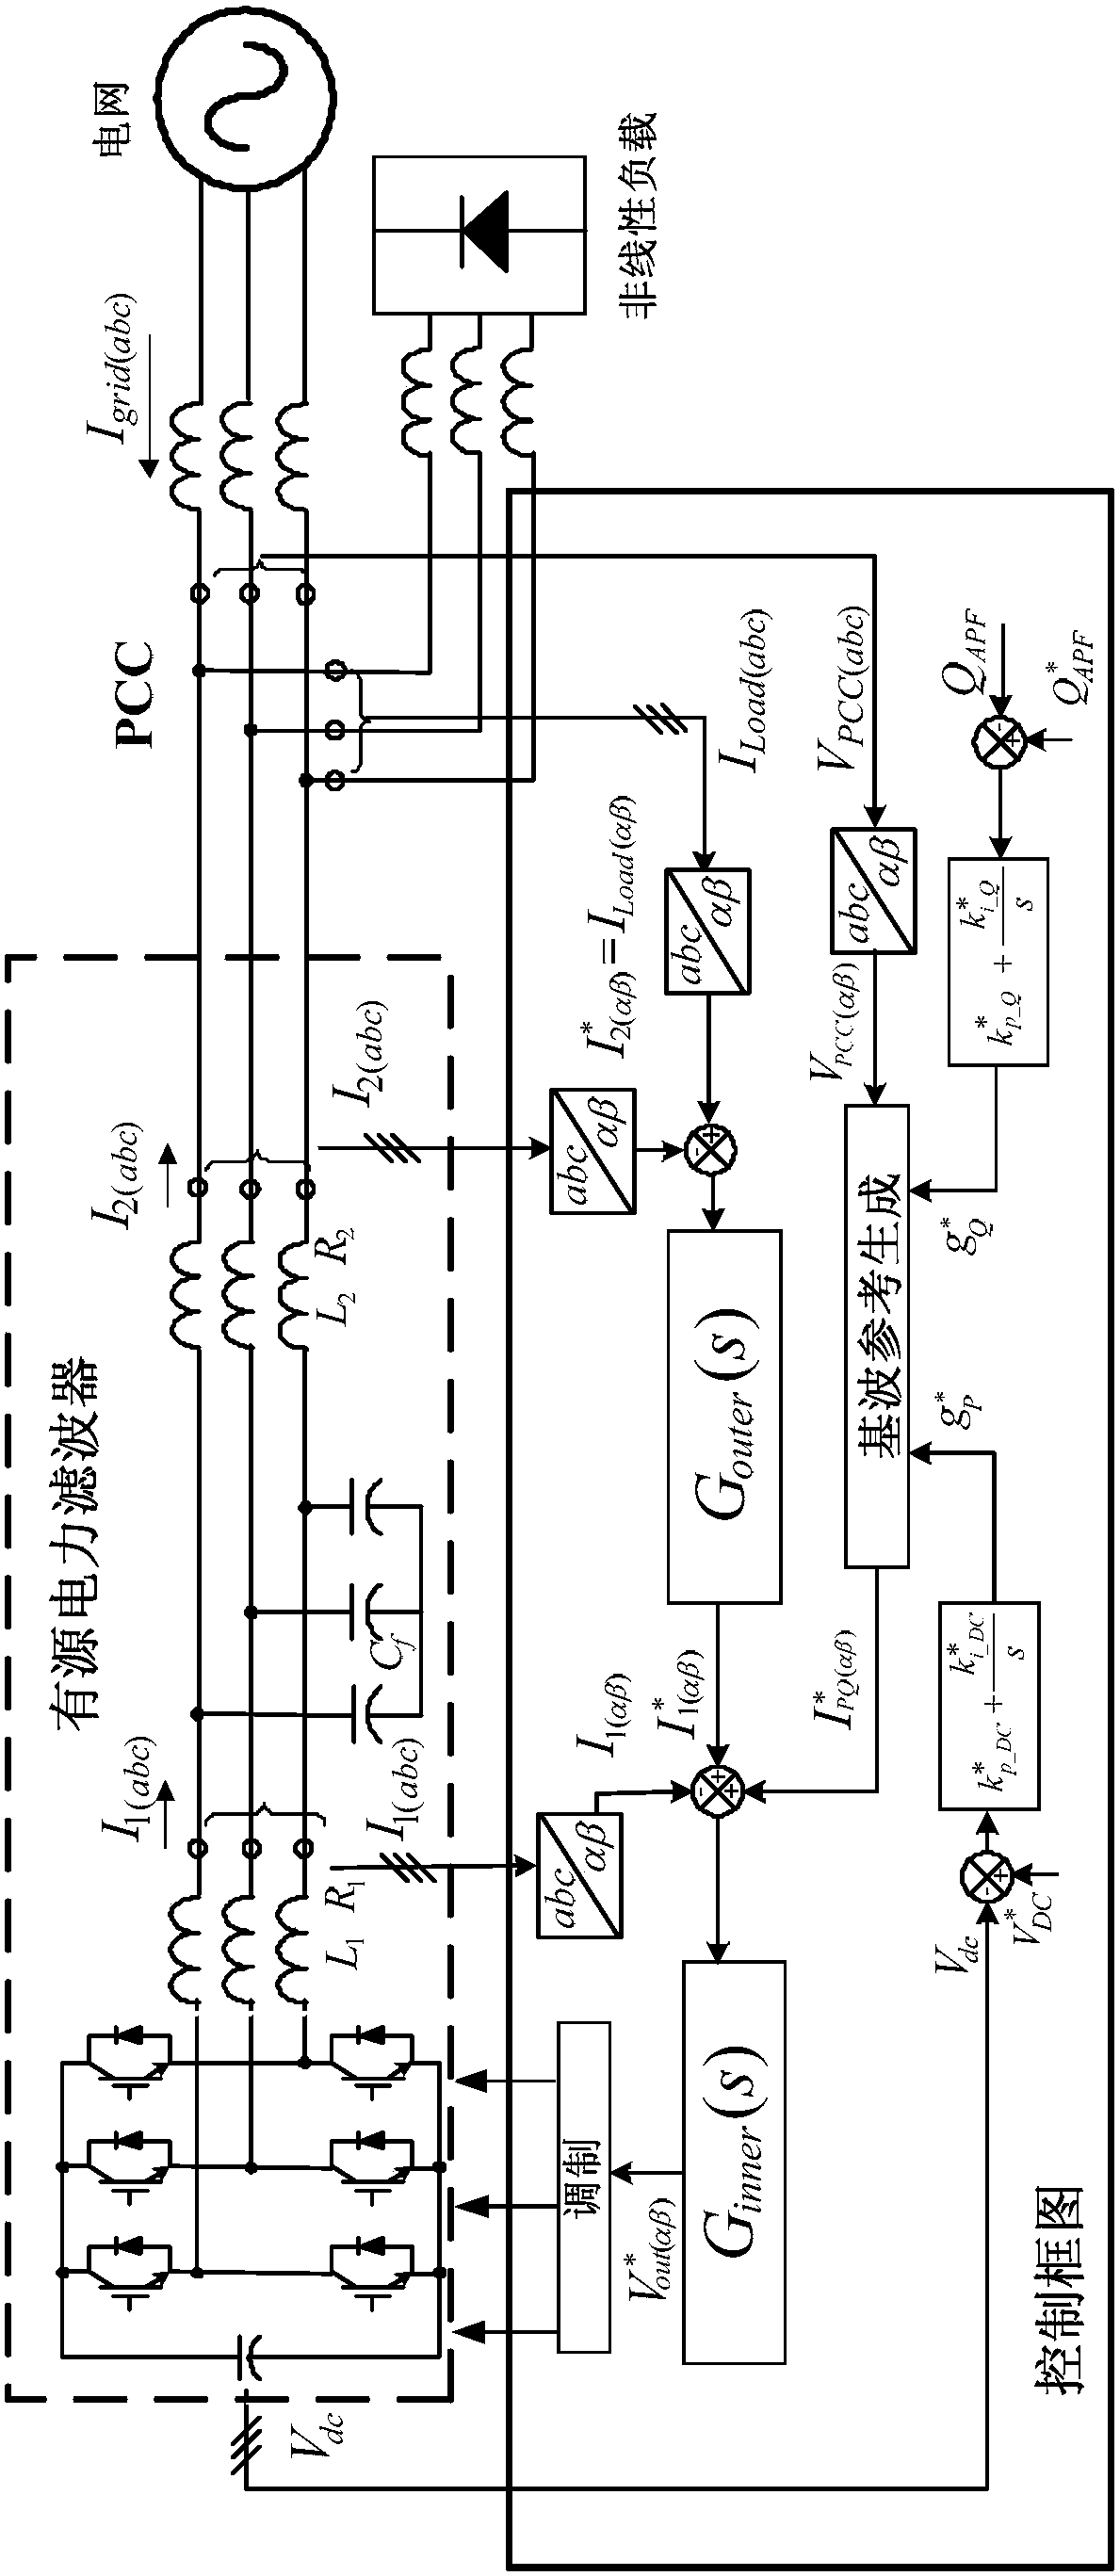 A dual-loop decoupling control method for active power filters